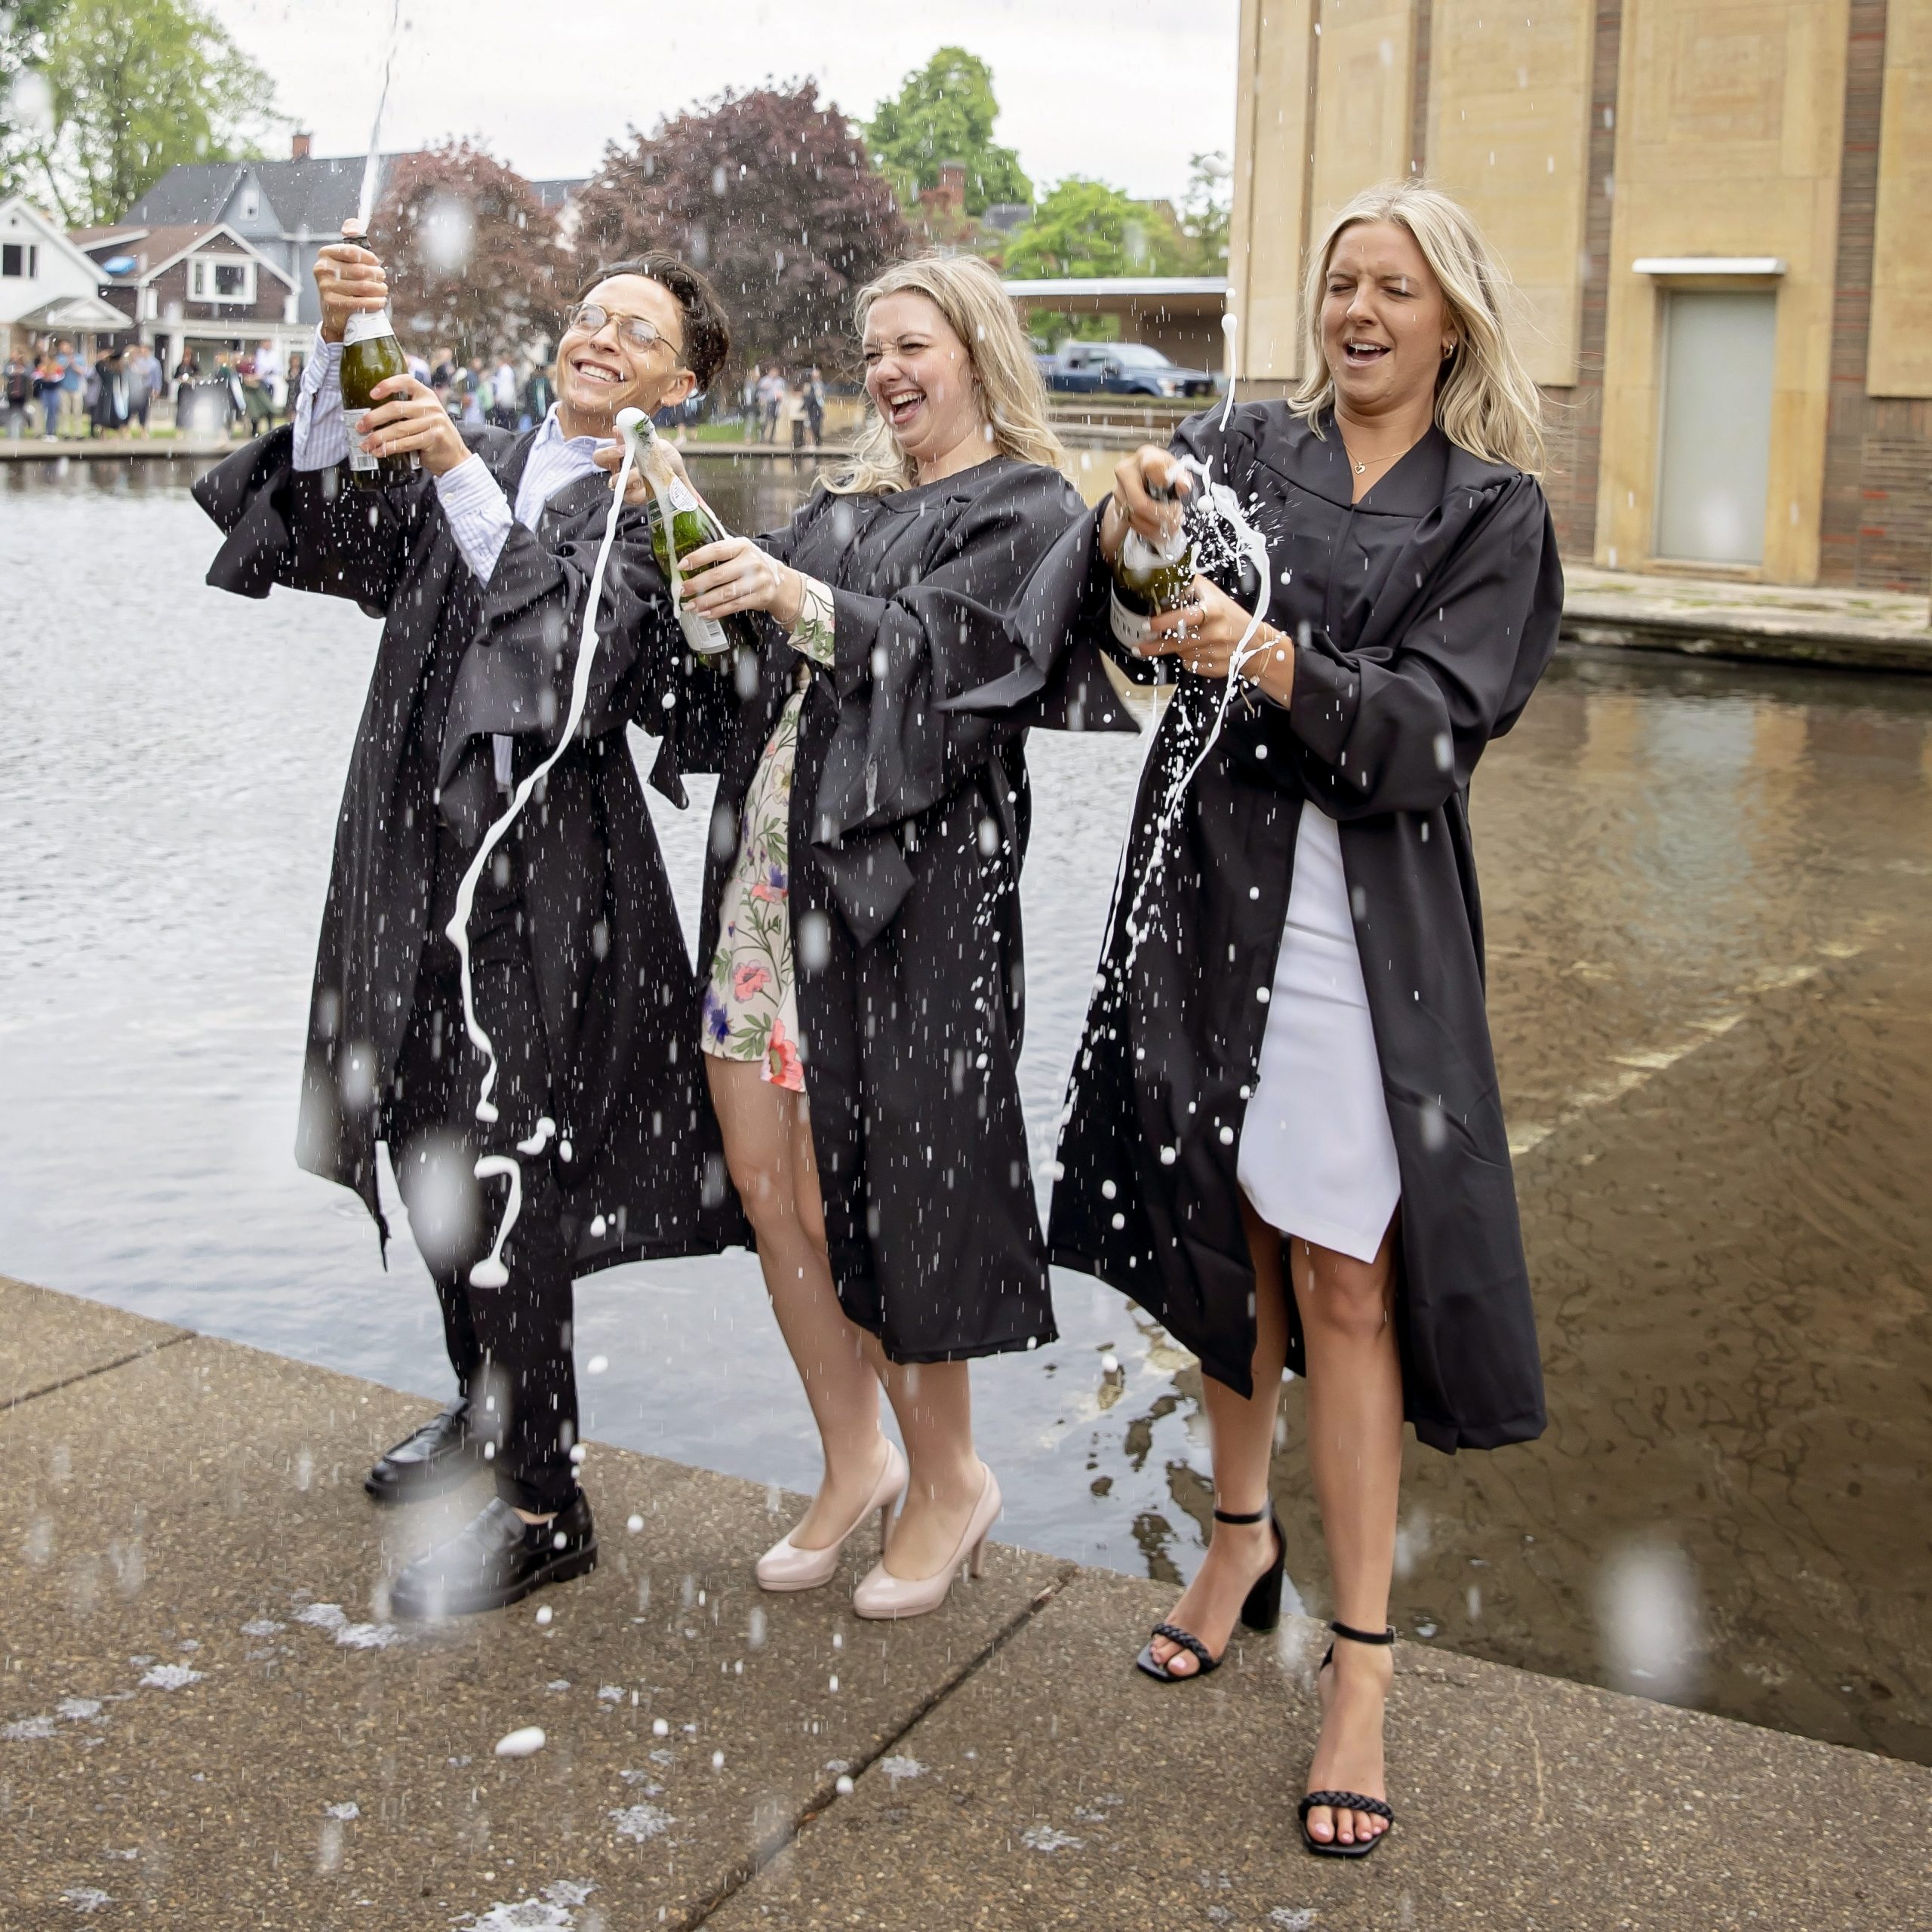 Graduates celebrating with champagne outside of Kleinhans Music Hall